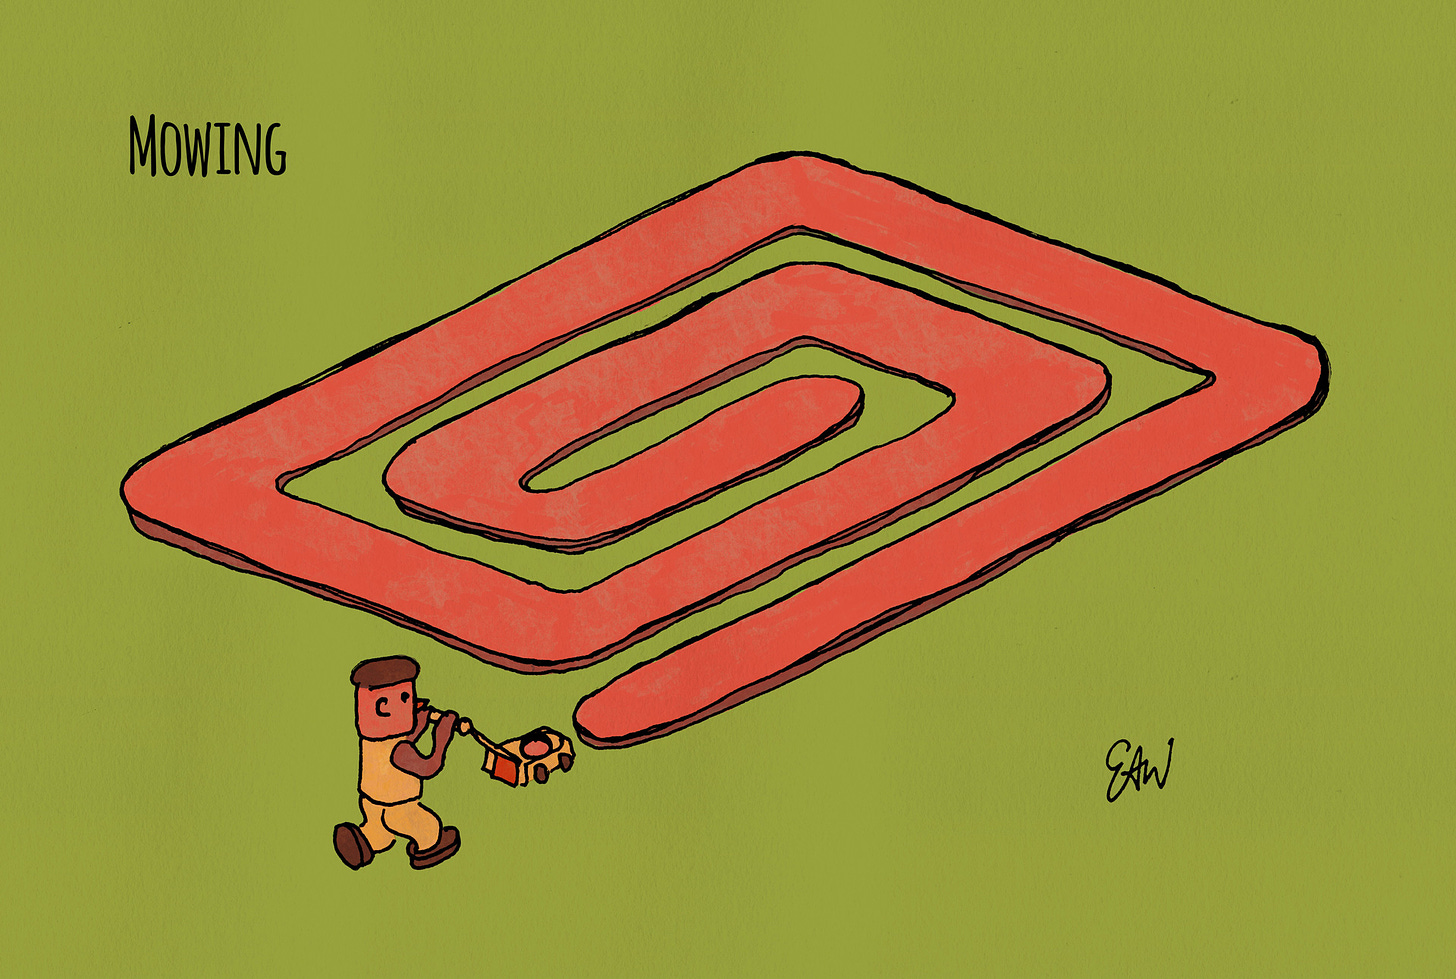 Drawing of a character mowing the lawn while following a spiral pattern to the centre.